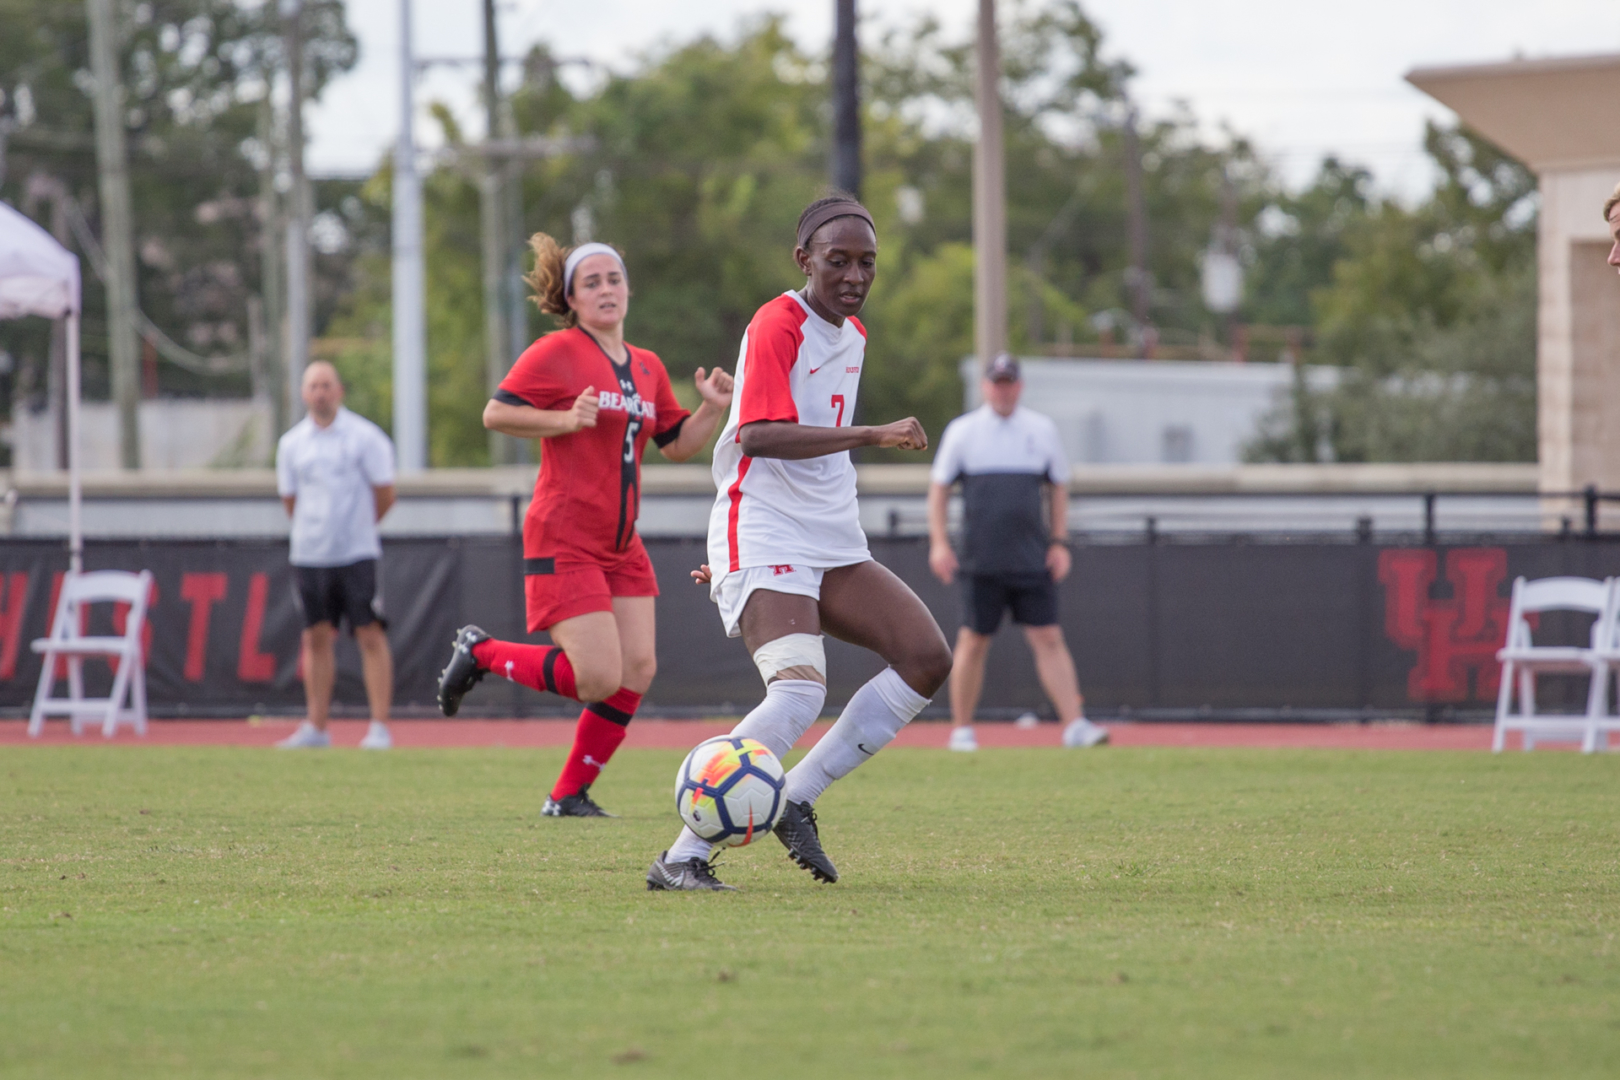 Senior forward Desiree Bowen tallied the first goal of the Cougars 3-0 senior night win over the Bearcats on Sunday afternoon. | Trevor Nolley/The Cougar